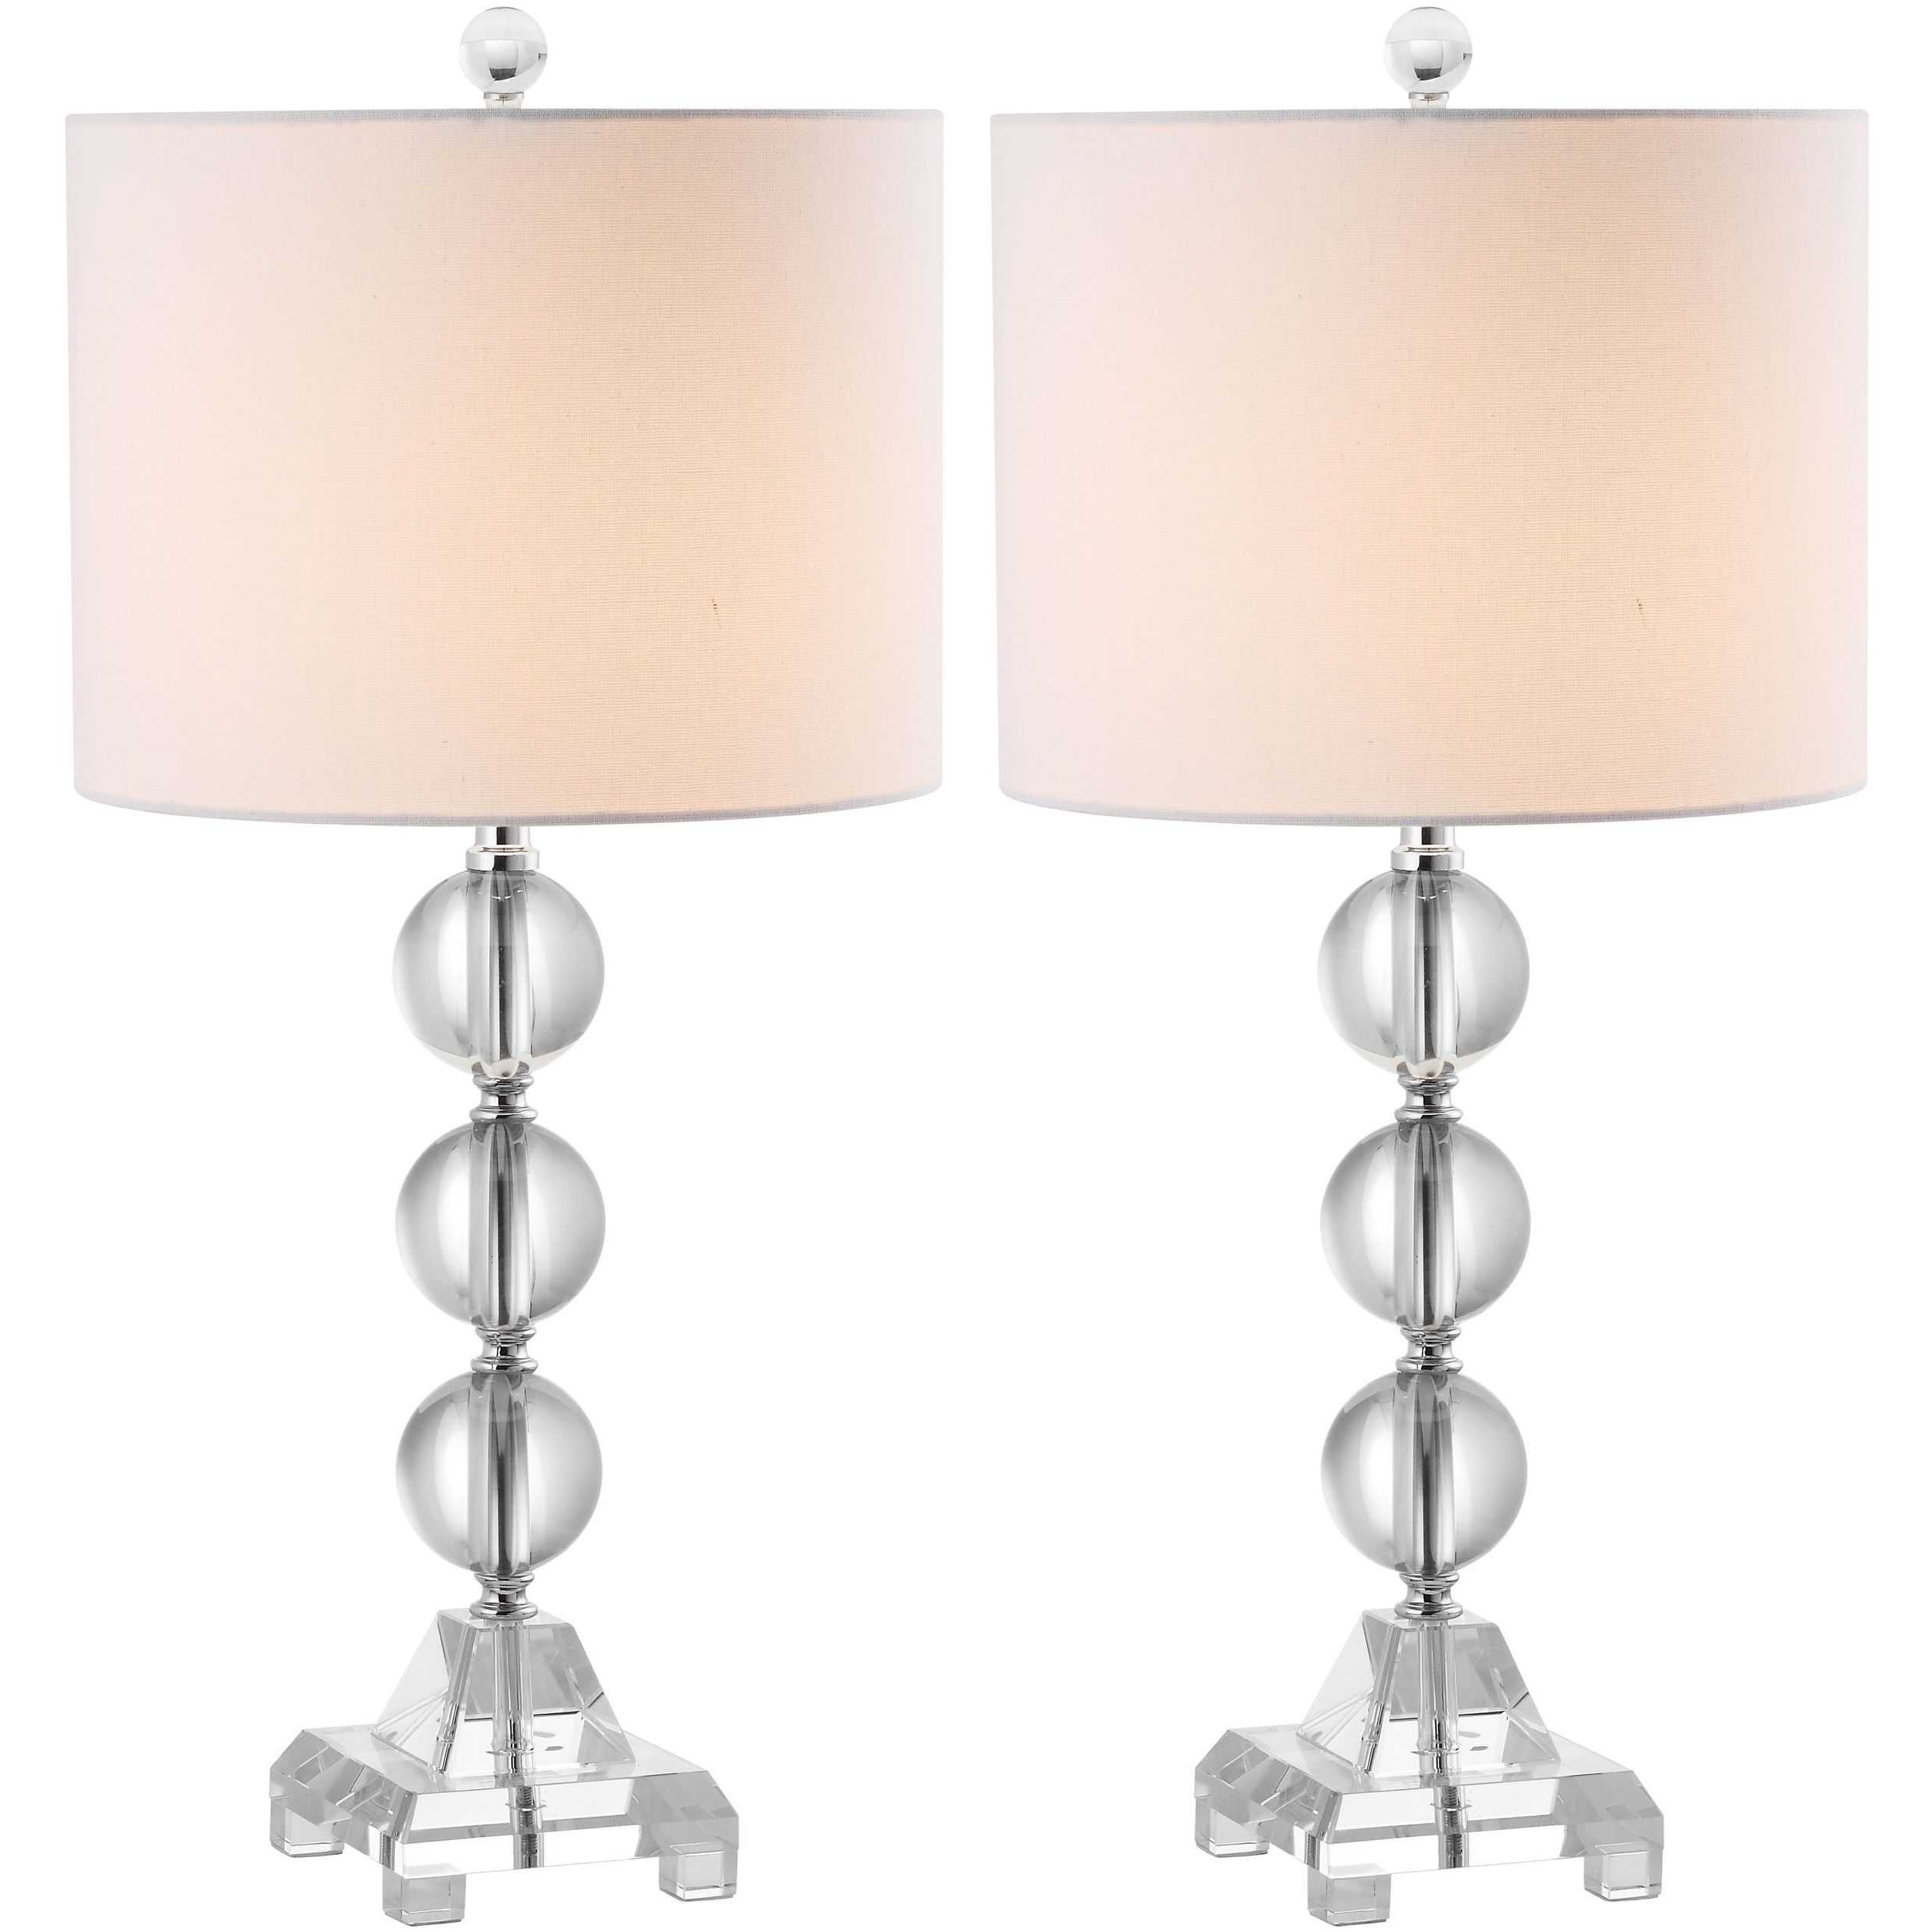 Crystal Living Room Table Lamps With Regard To Current 38 Most Supreme Bedside Lamps Black Table Lamp White Living Room (View 5 of 20)